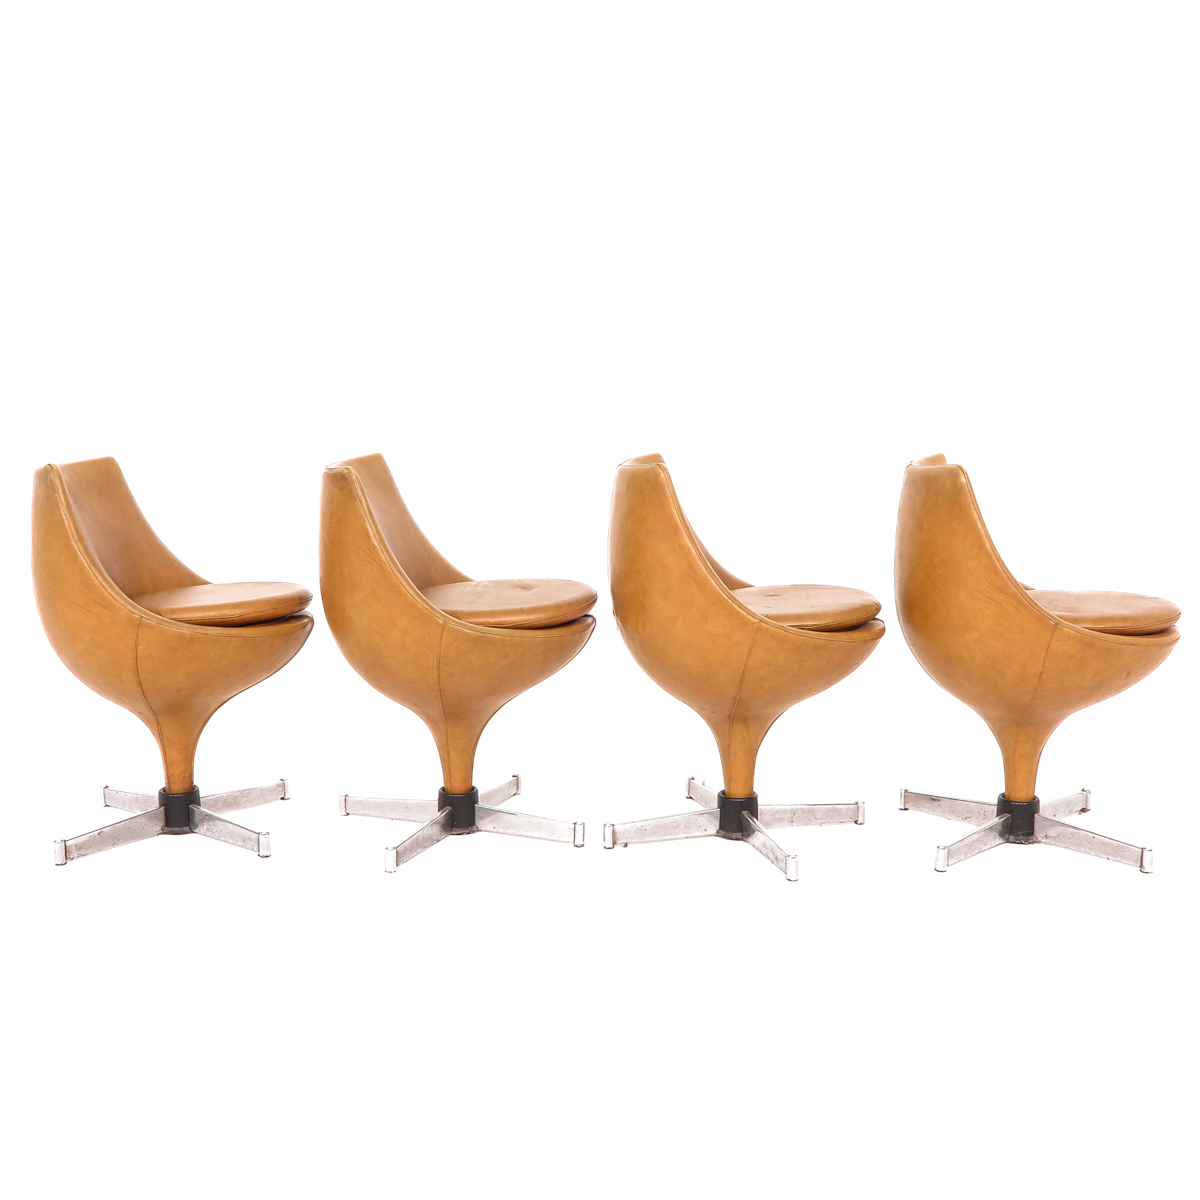 A Set of 4 Pierre Guariche Designer Chairs - Image 4 of 10